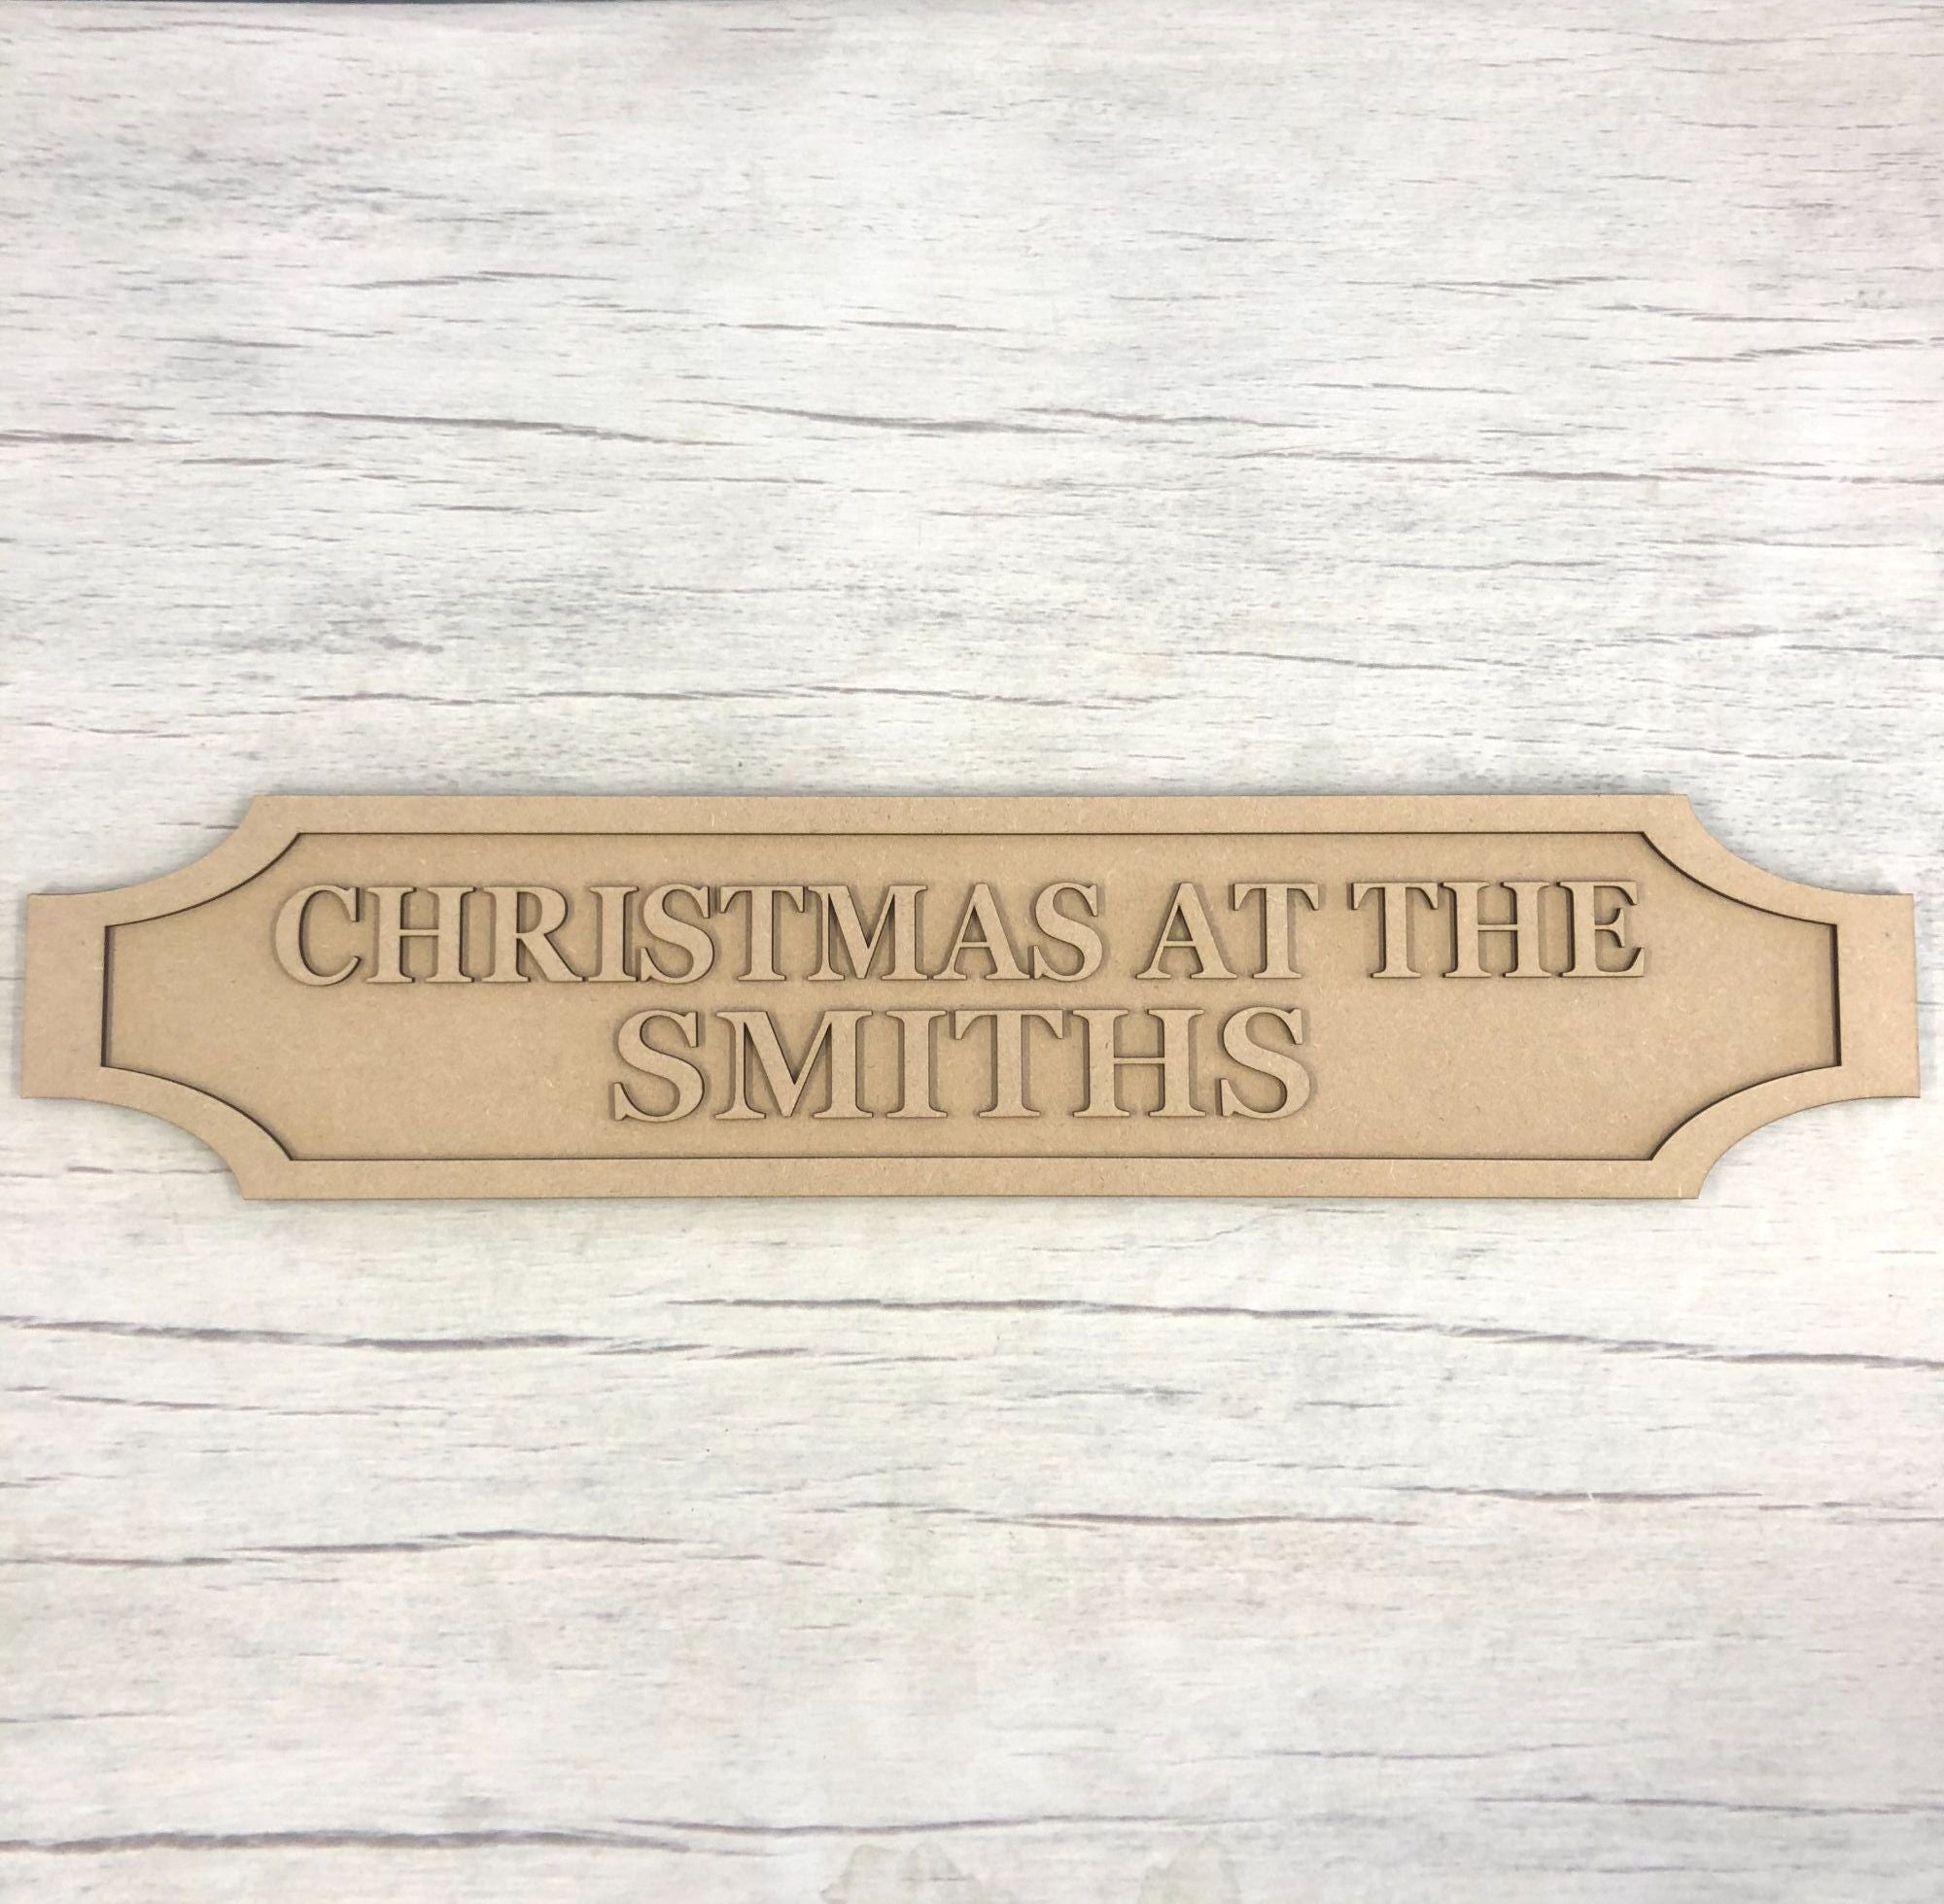 Base MDF - Christmas railway road sign plaque - customised